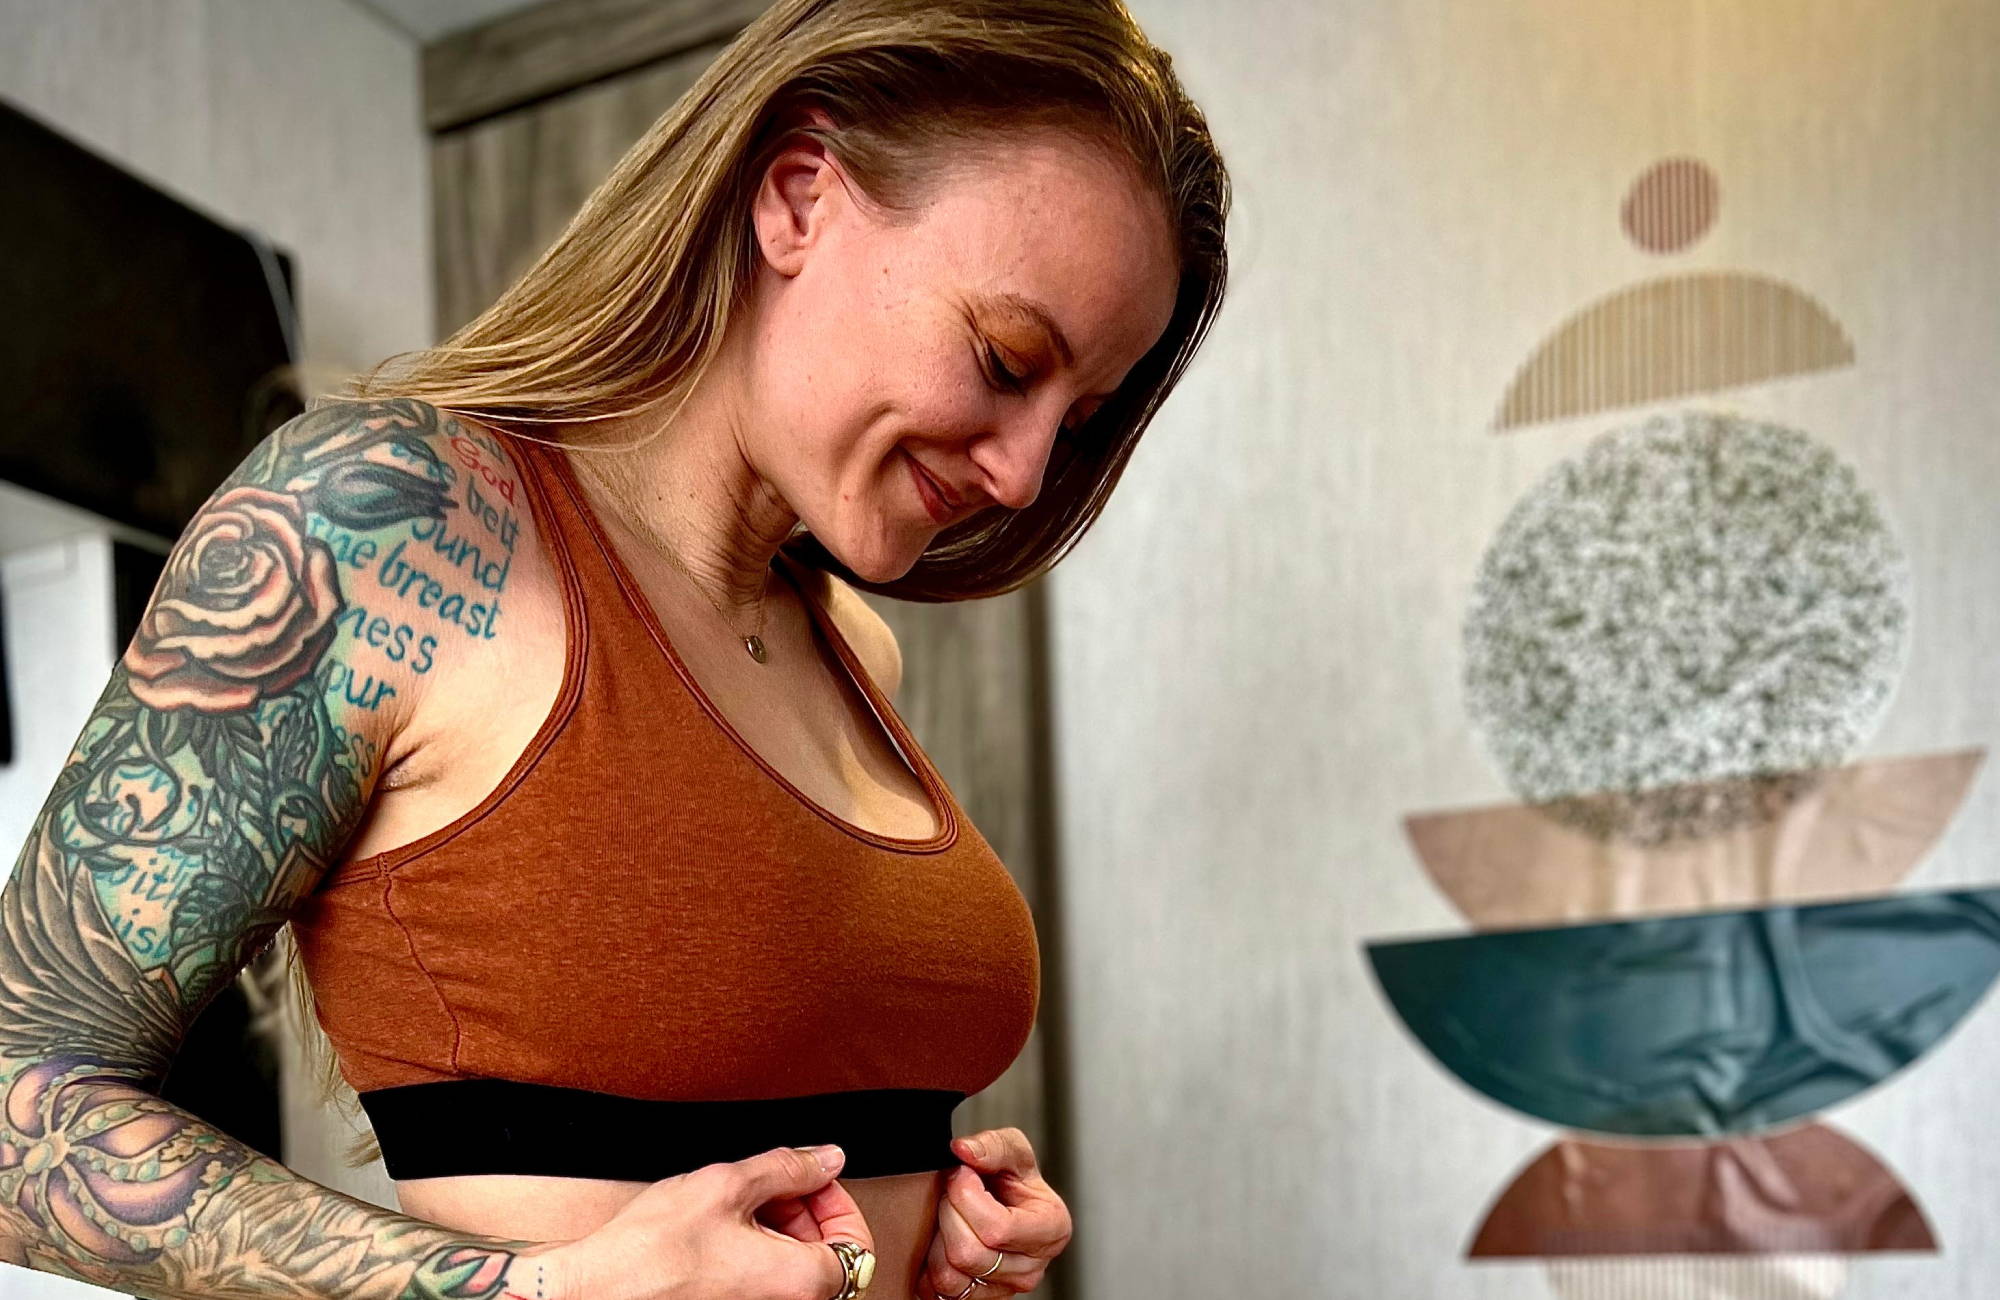 A tattooed woman wearing a brown bralette stands with her hands on her ribs and smiles.